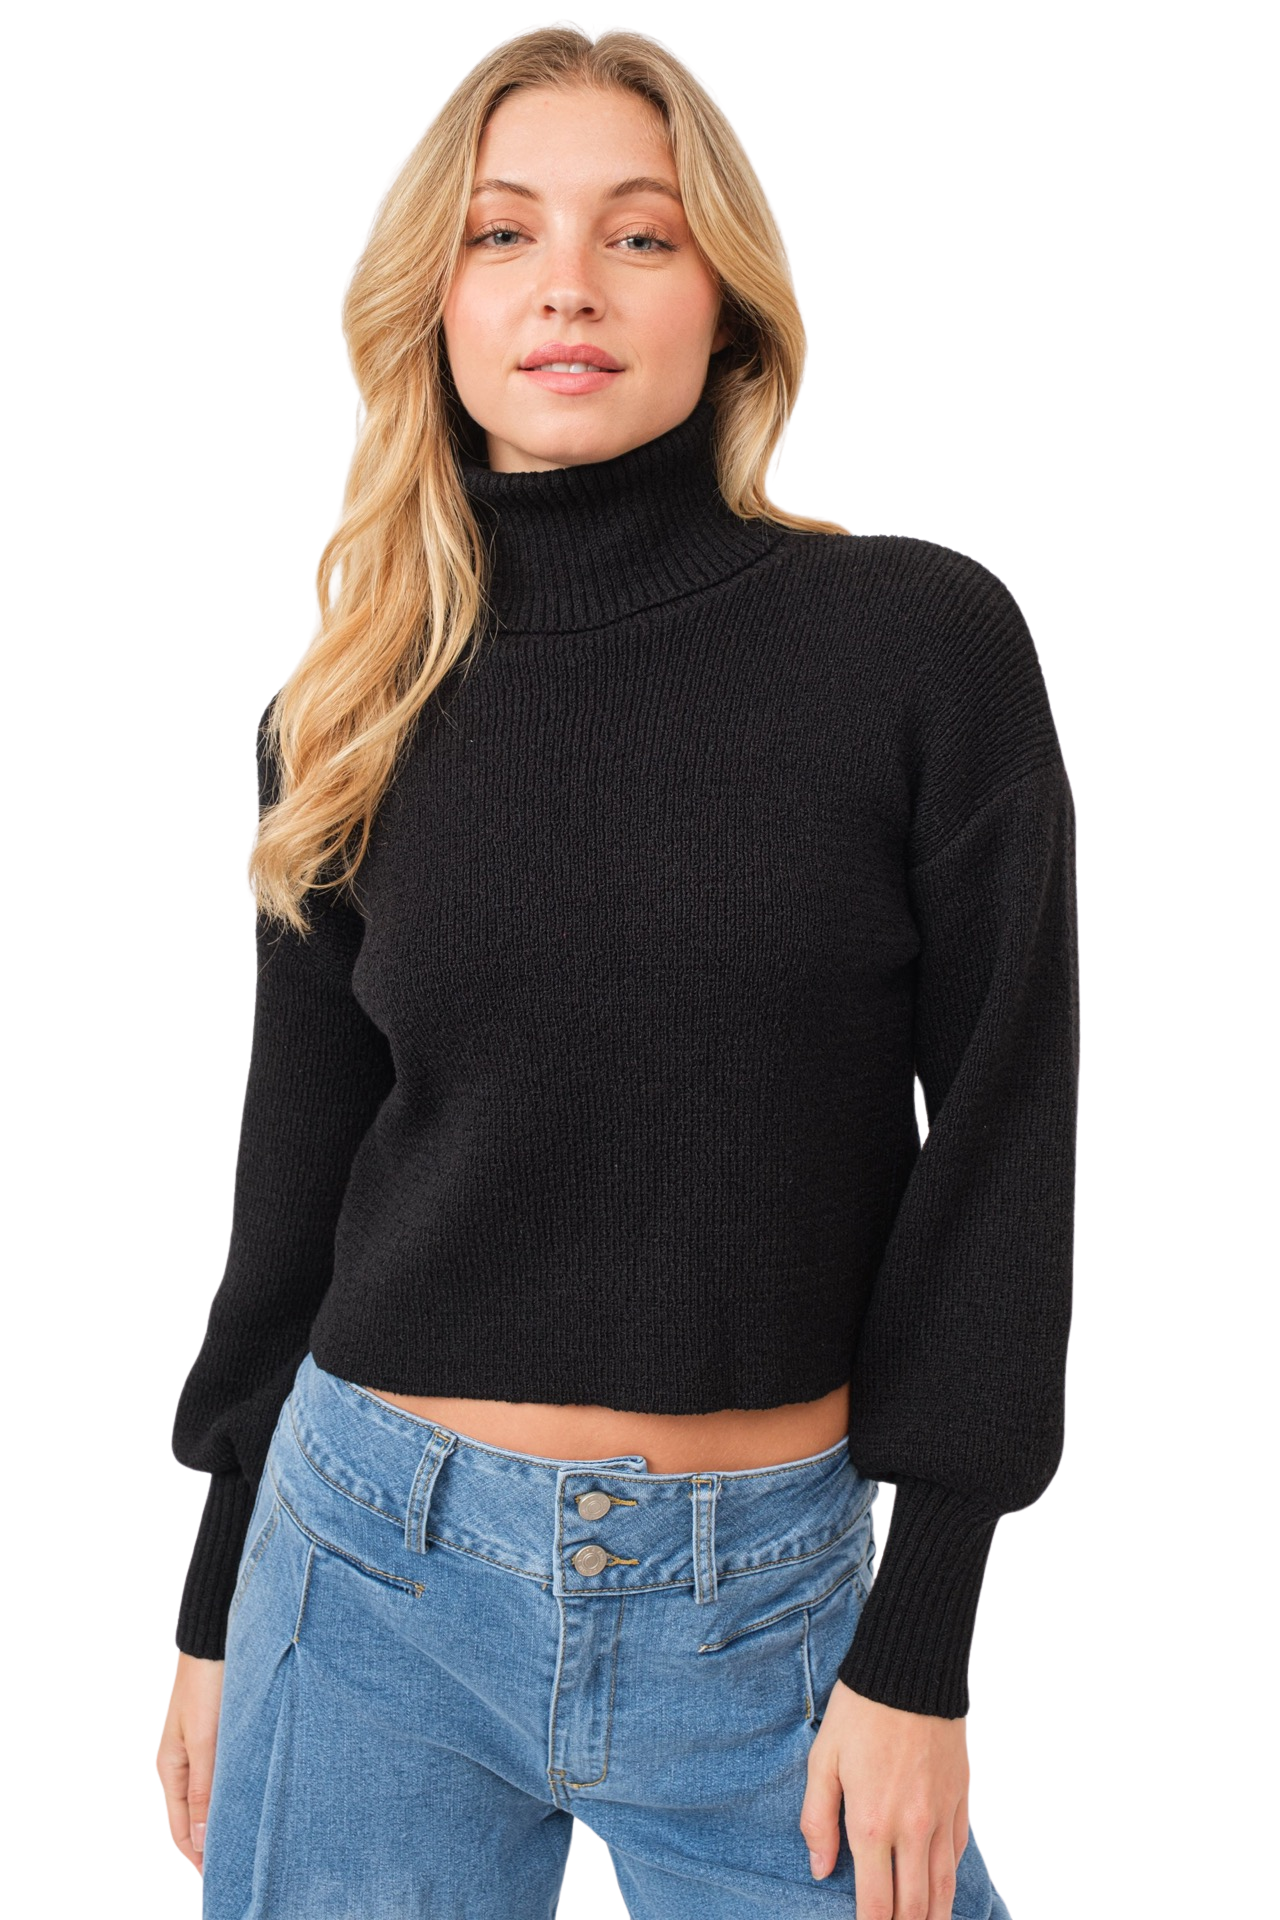 Apparel- Aaron and Amber Sweater Bianca Sweater